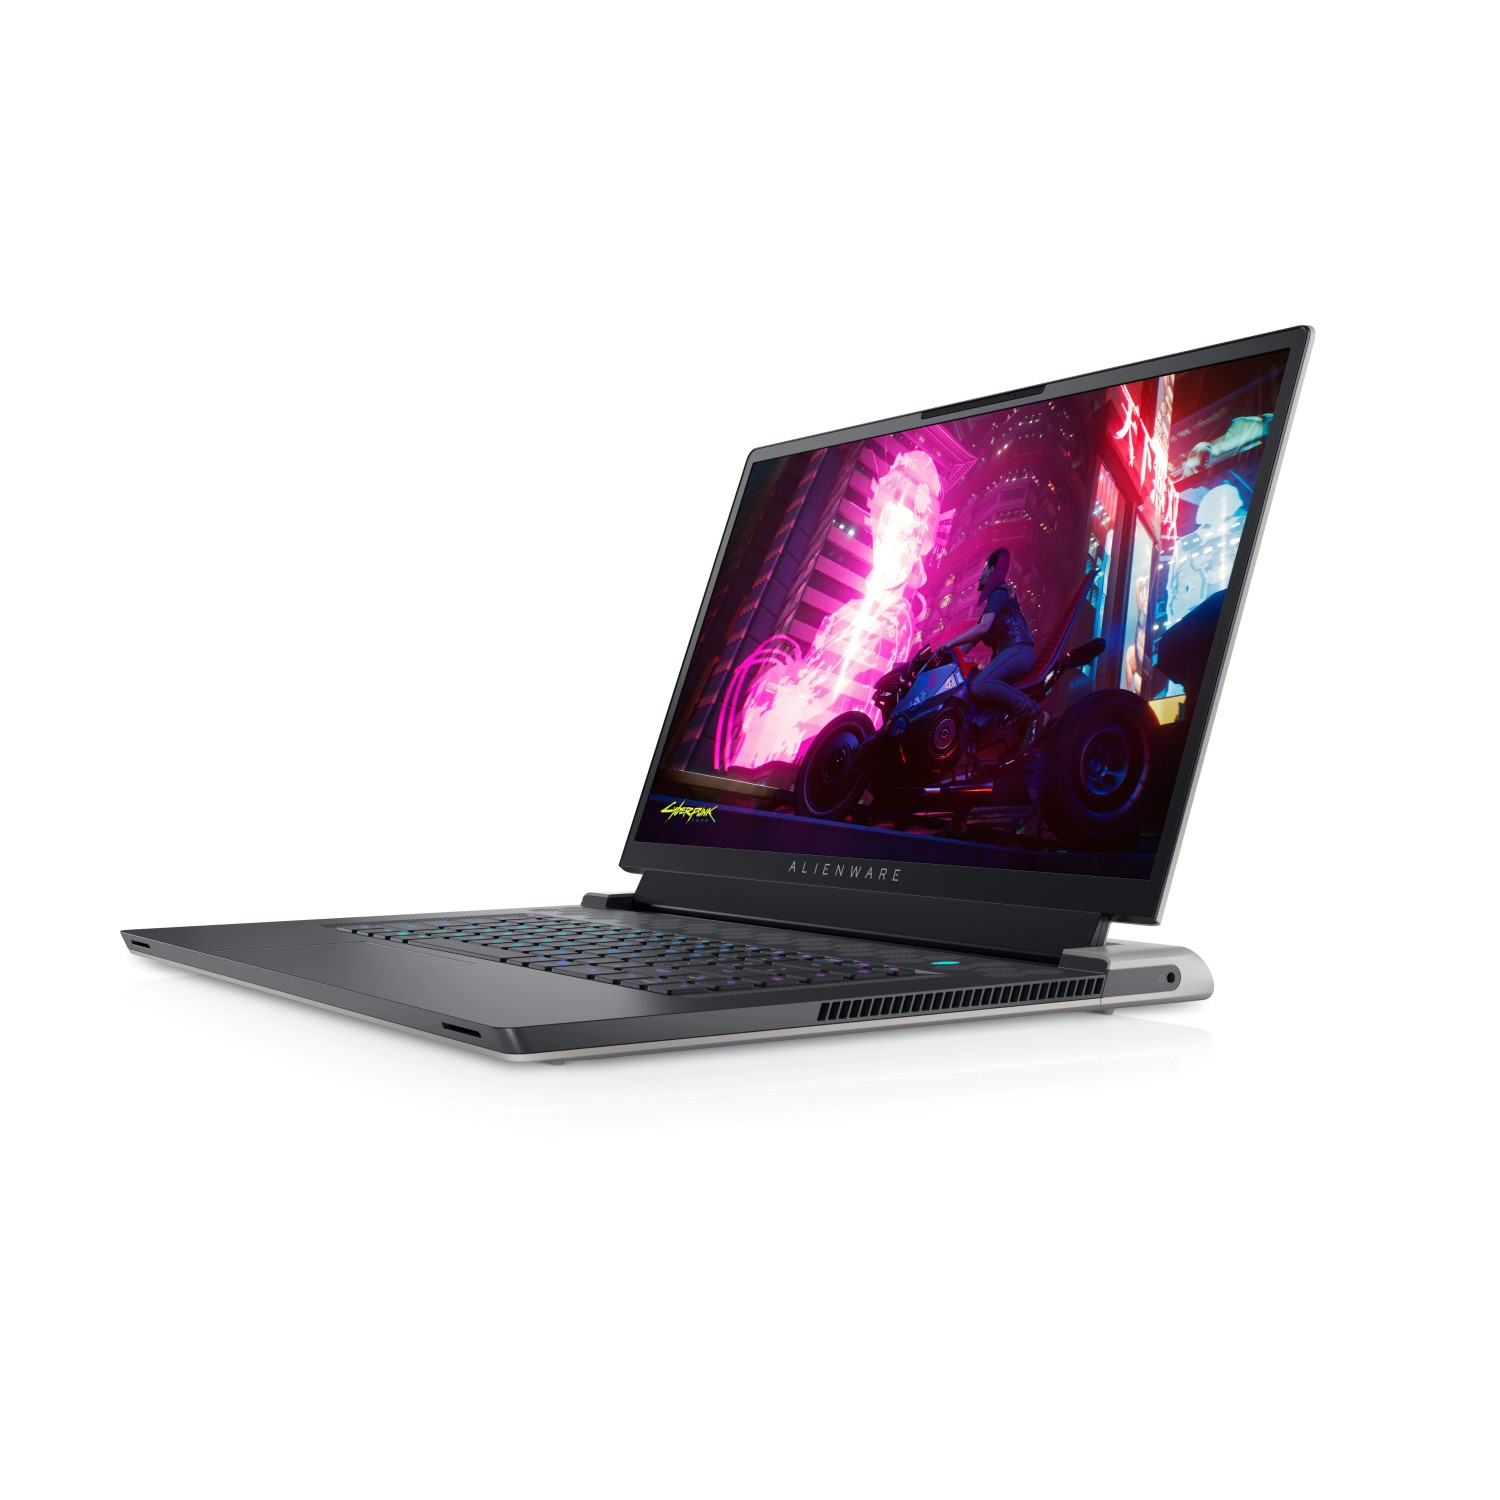 Refurbished (Excellent) - Alienware X17 R1, 17" FHD, Nvidia RTX 3060, i7-11800H, 16GB RAM, 512GB SSD, WIN10 HOME, Certified Refurbished